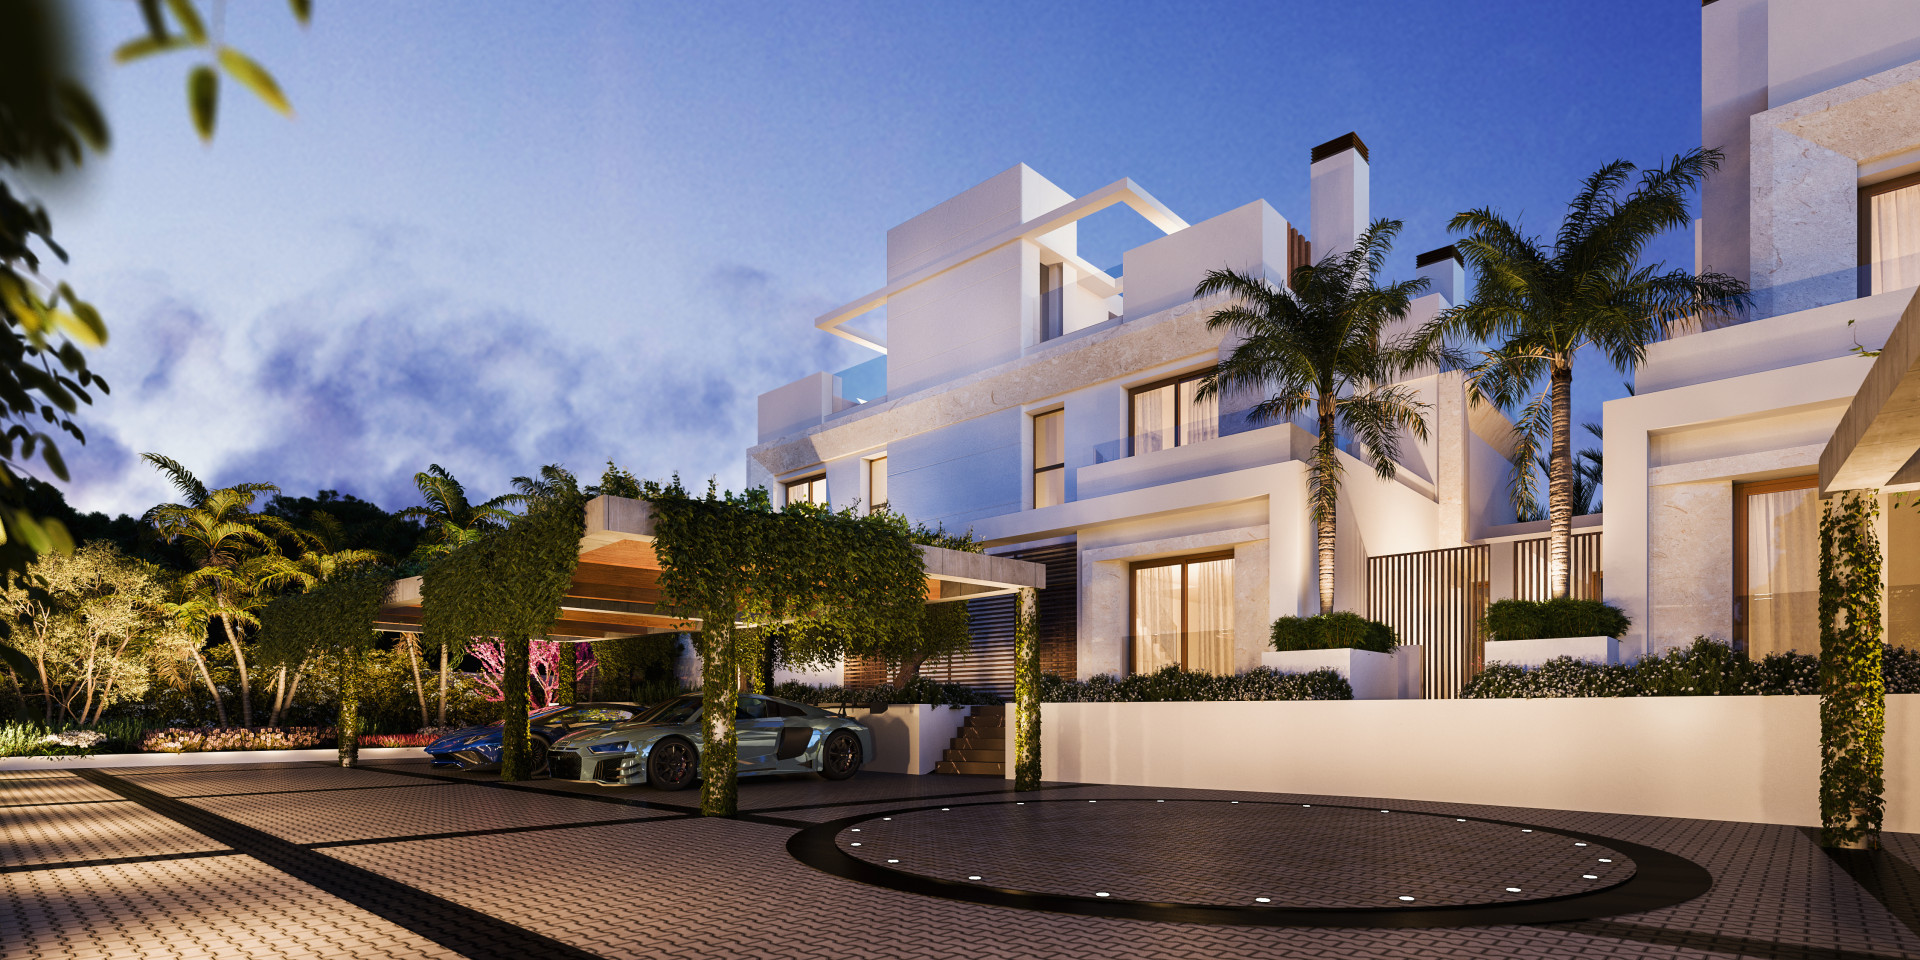 Luxury villa with private pool and frontline beach location in Marbella East. | Image 1